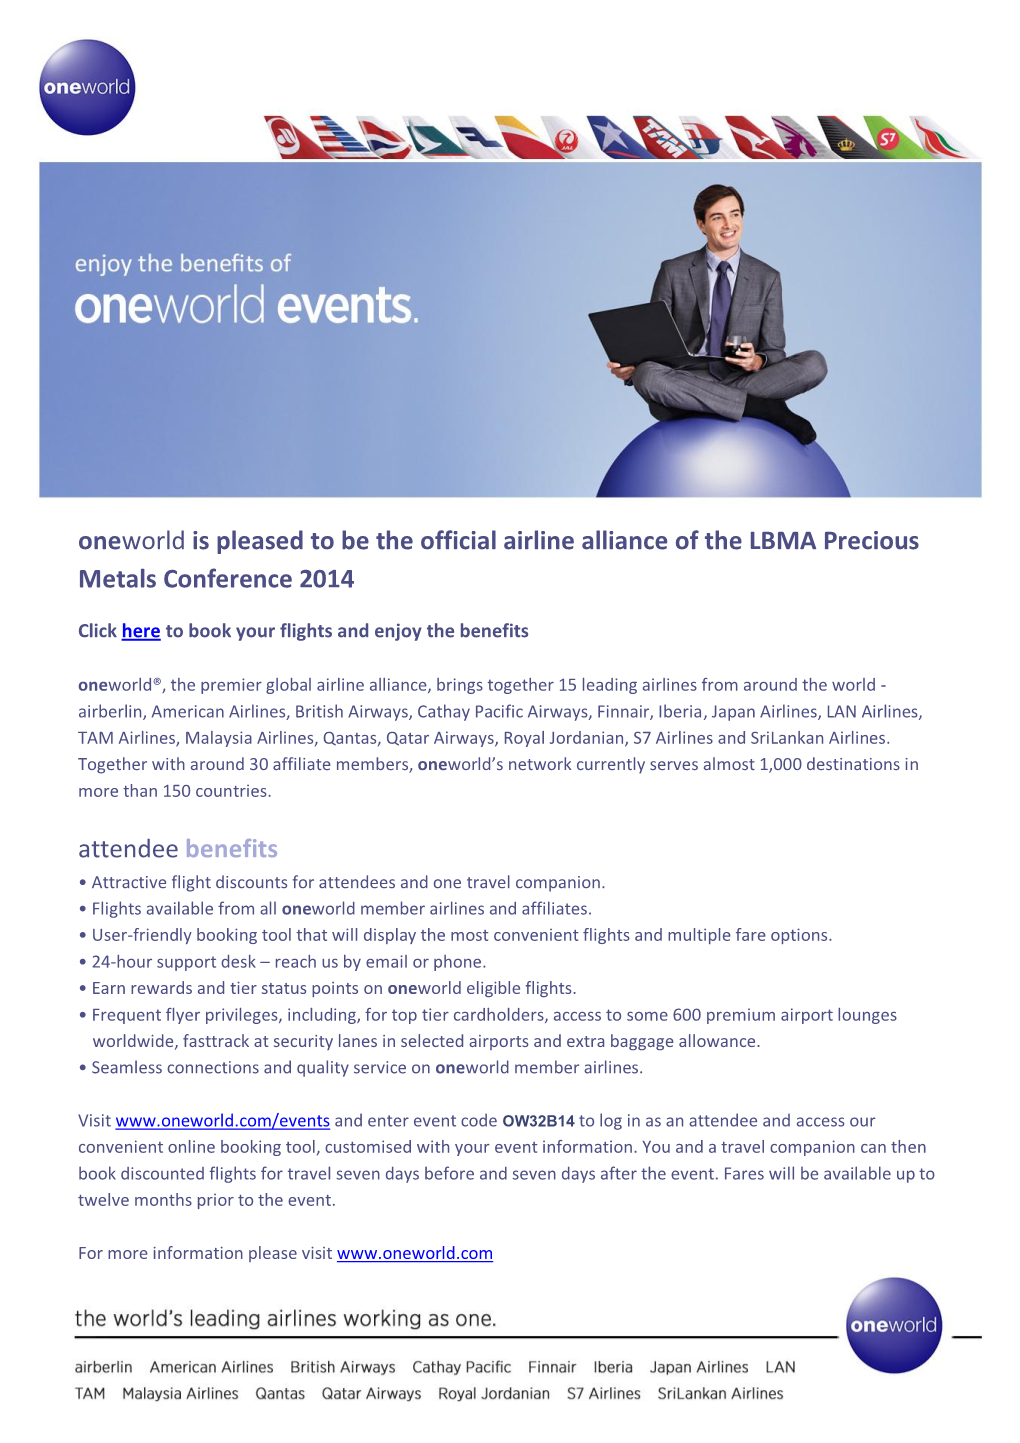 Oneworld Is Pleased to Be the Official Airline Alliance of the LBMA Precious Metals Conference 2014